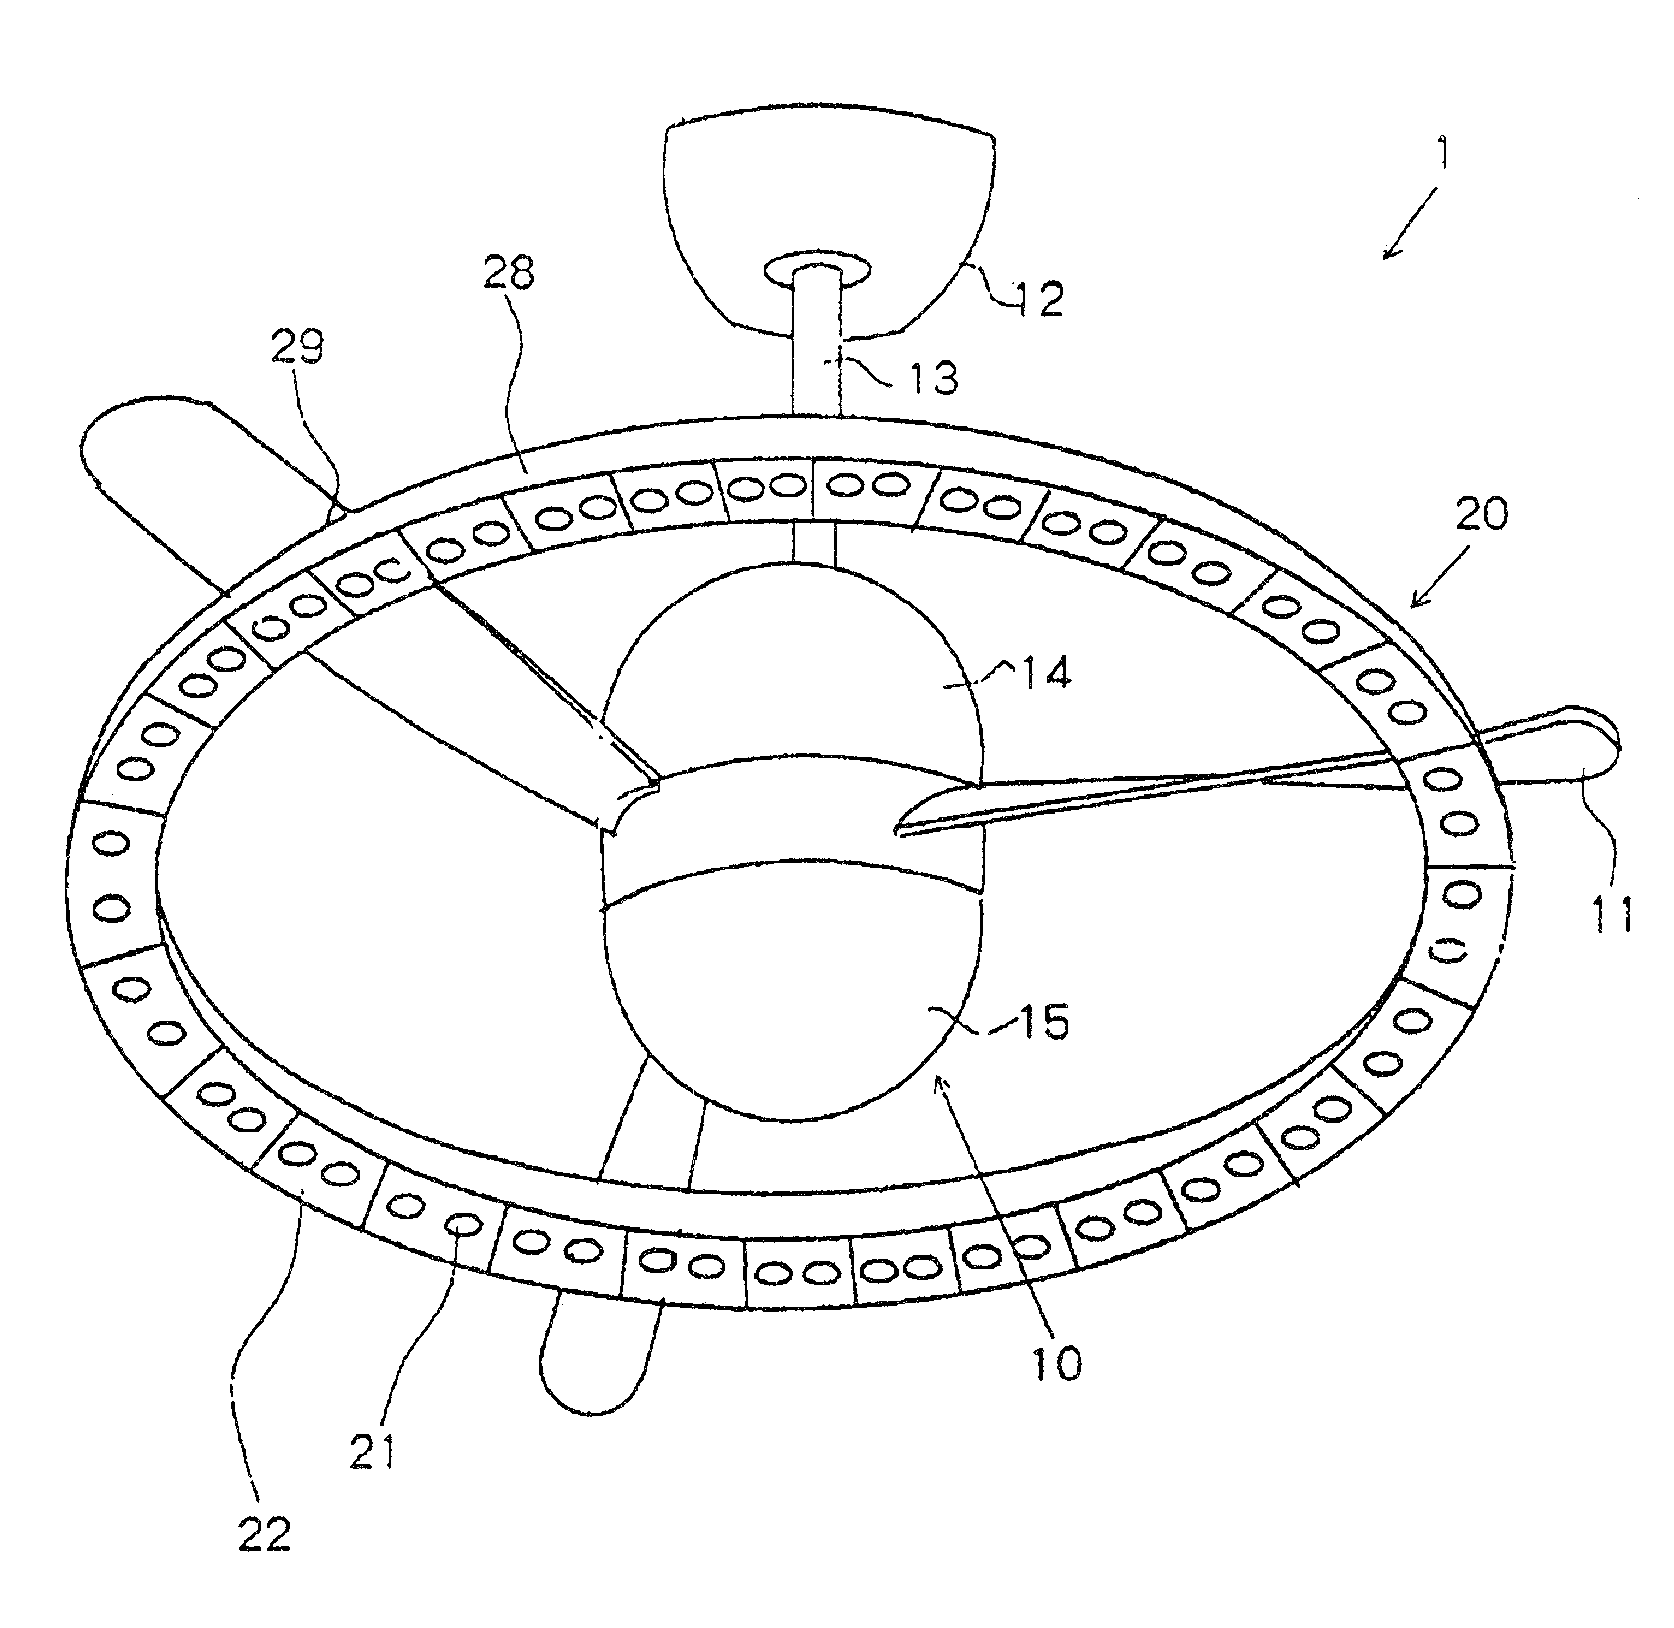 Ceiling fan with rotary blade surface light